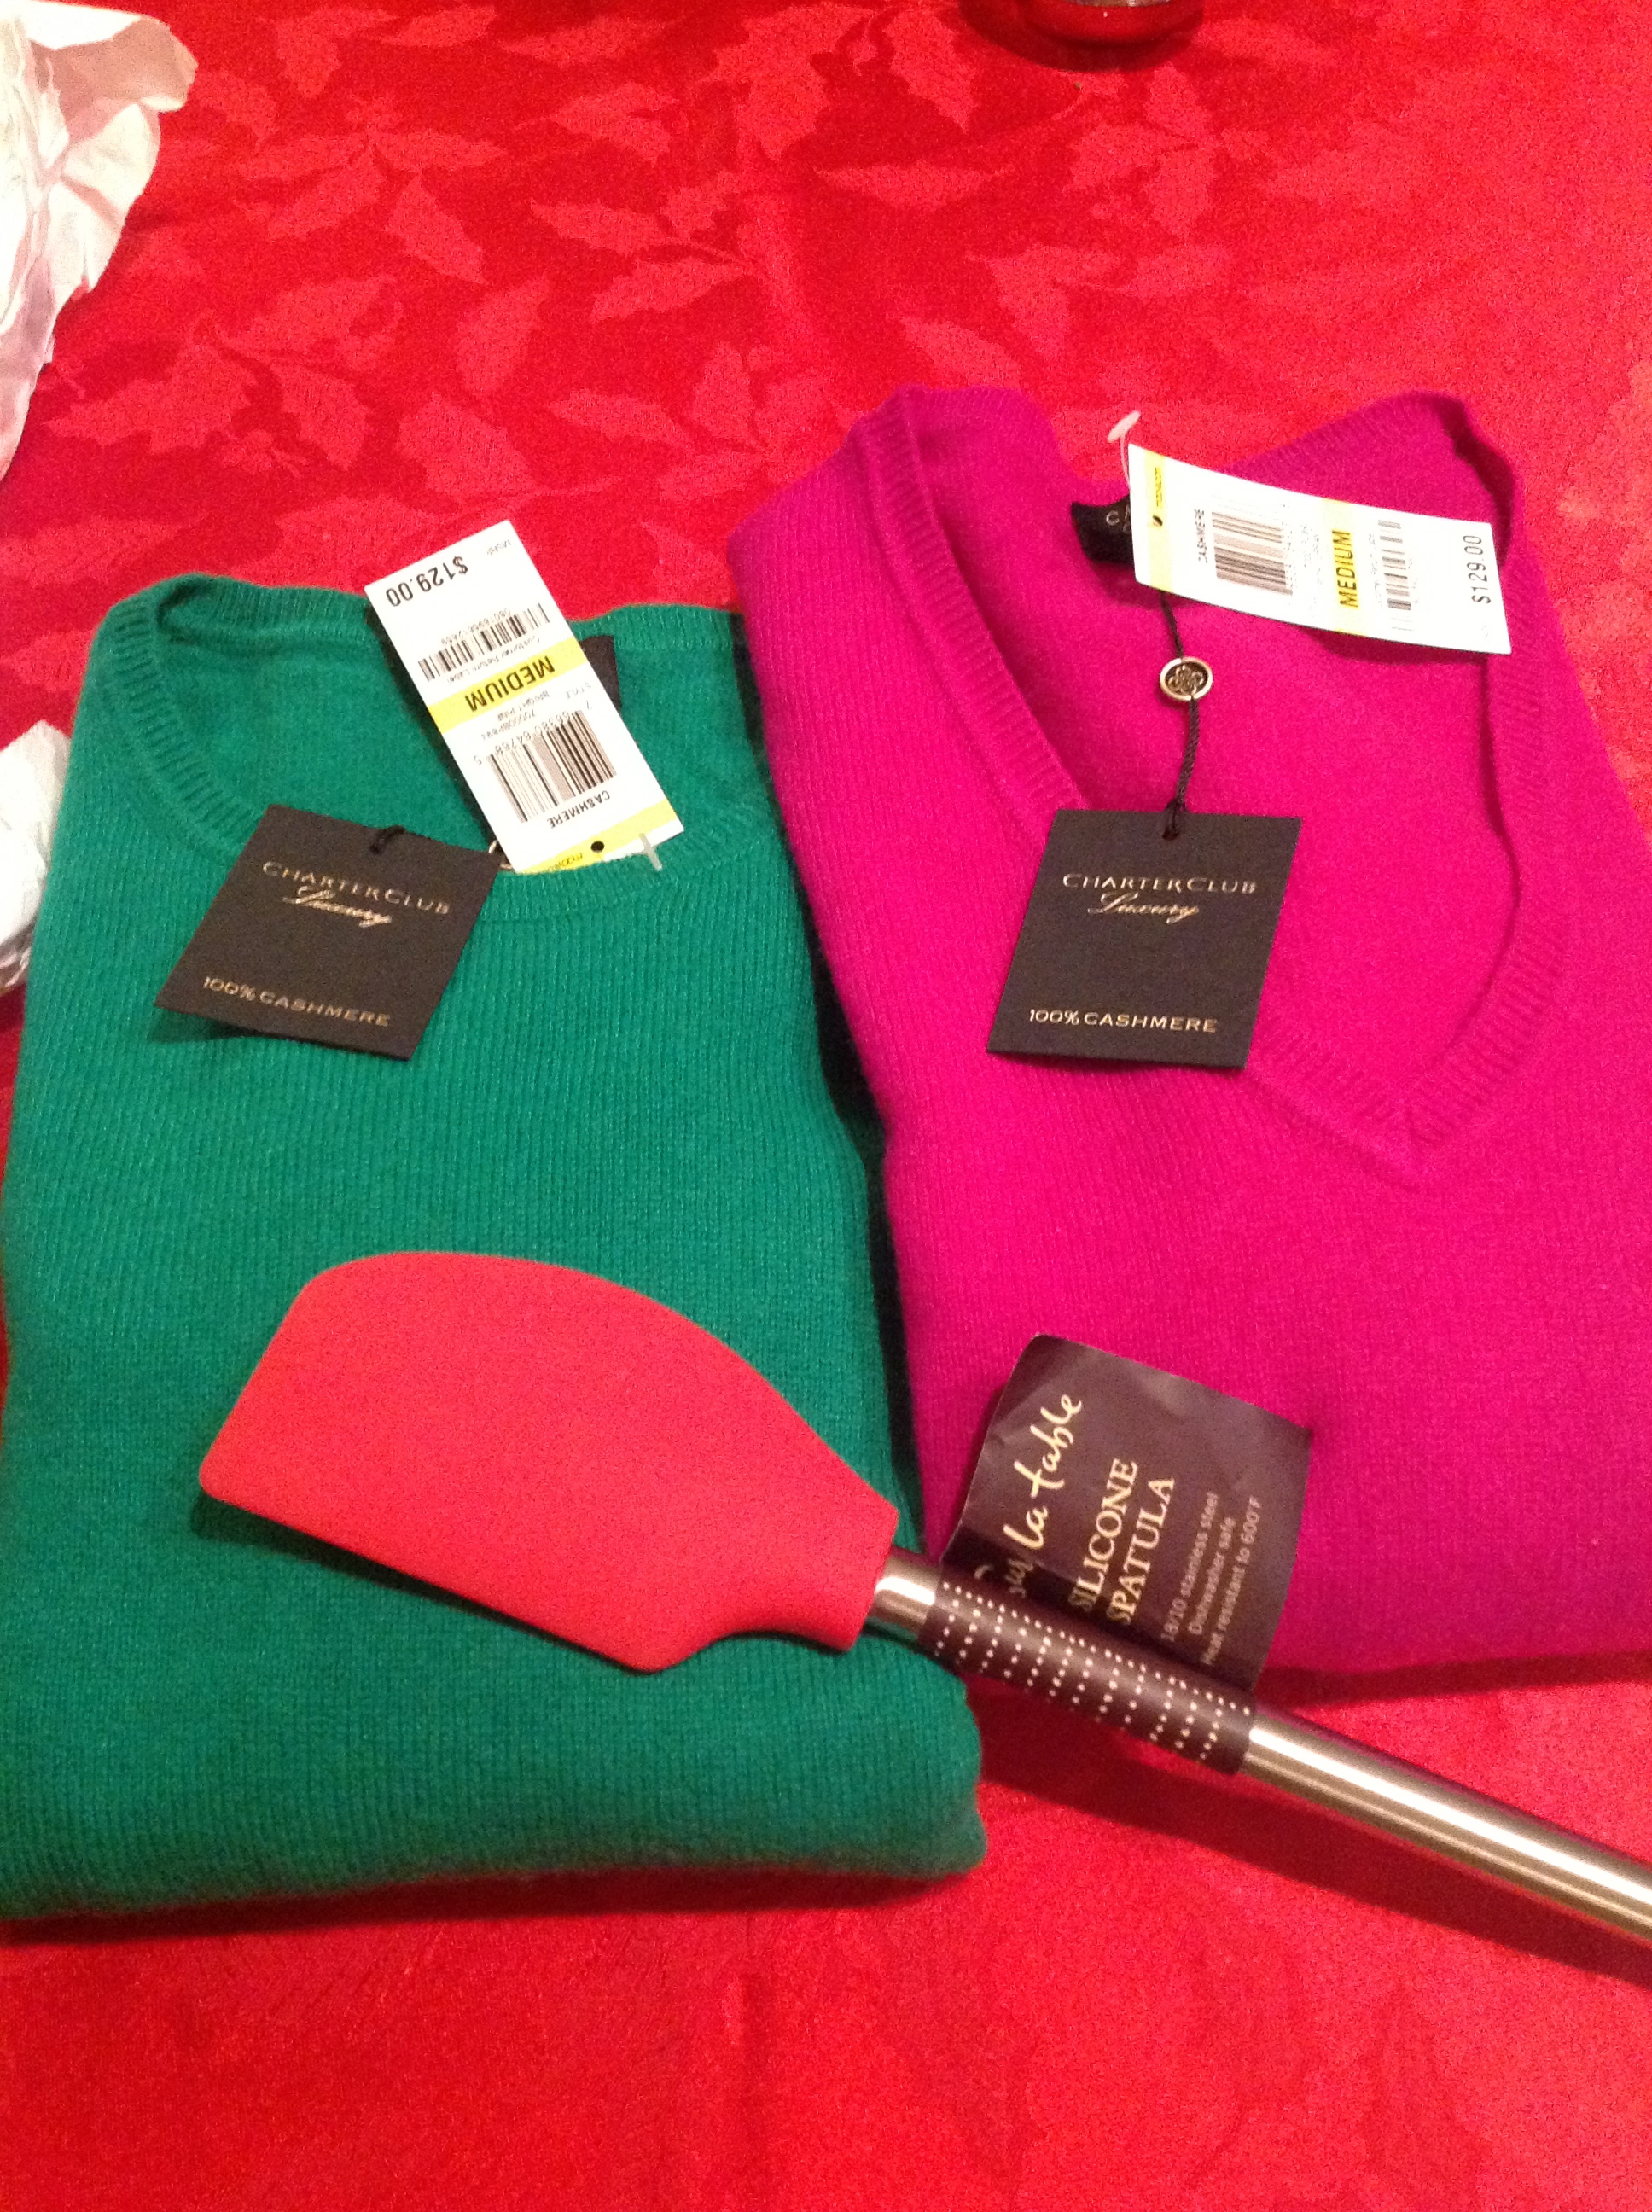 Black friday deals:cashmere sweaters and spatula from Sur la Table